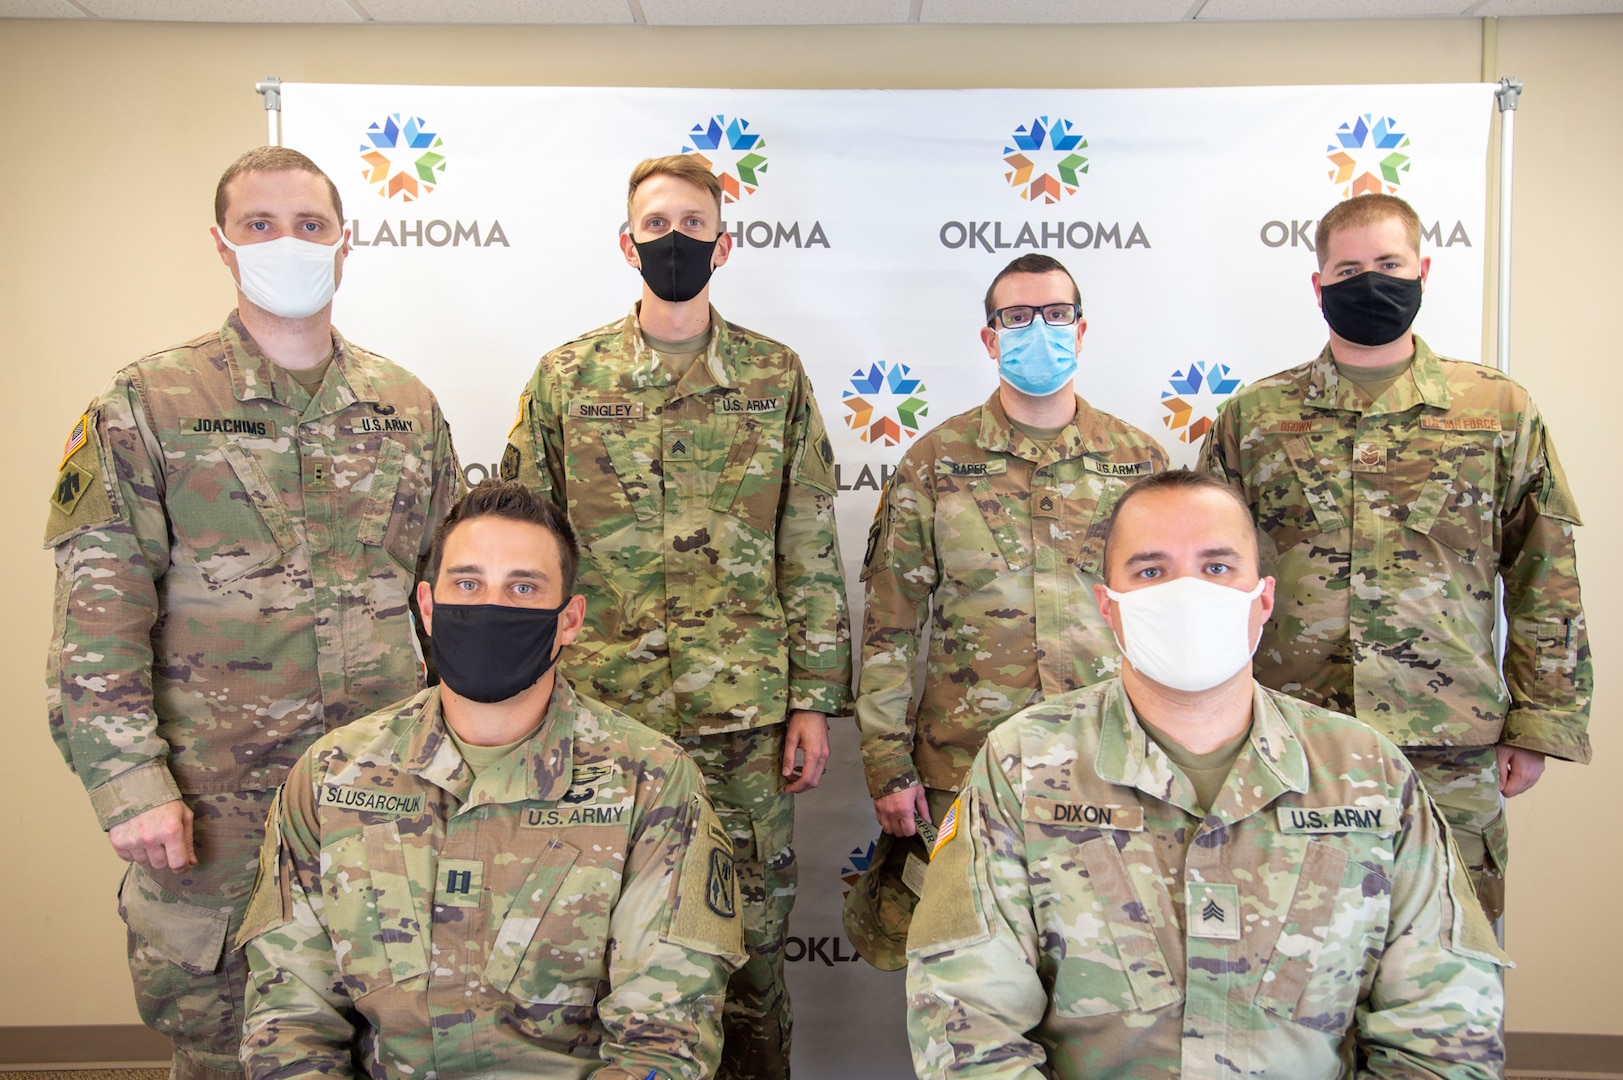 From left to right with the Oklahoma National Guard defensive cyber operations element, Chief Warrant Officer 2 Tyson Joachims, Capt. Danny Slusarchuck, Sgt. Sean Singley, Staff Sgt. Rick Raper, Sgt. Brandon Dixon, and Tech Sgt. Craig Brown, mission defense team noncommissioned officer in charge with the 137th Special Operations Communications Flight, won the online 2020 NetWars Cyber Shield competition Sept. 18-19, 2020.